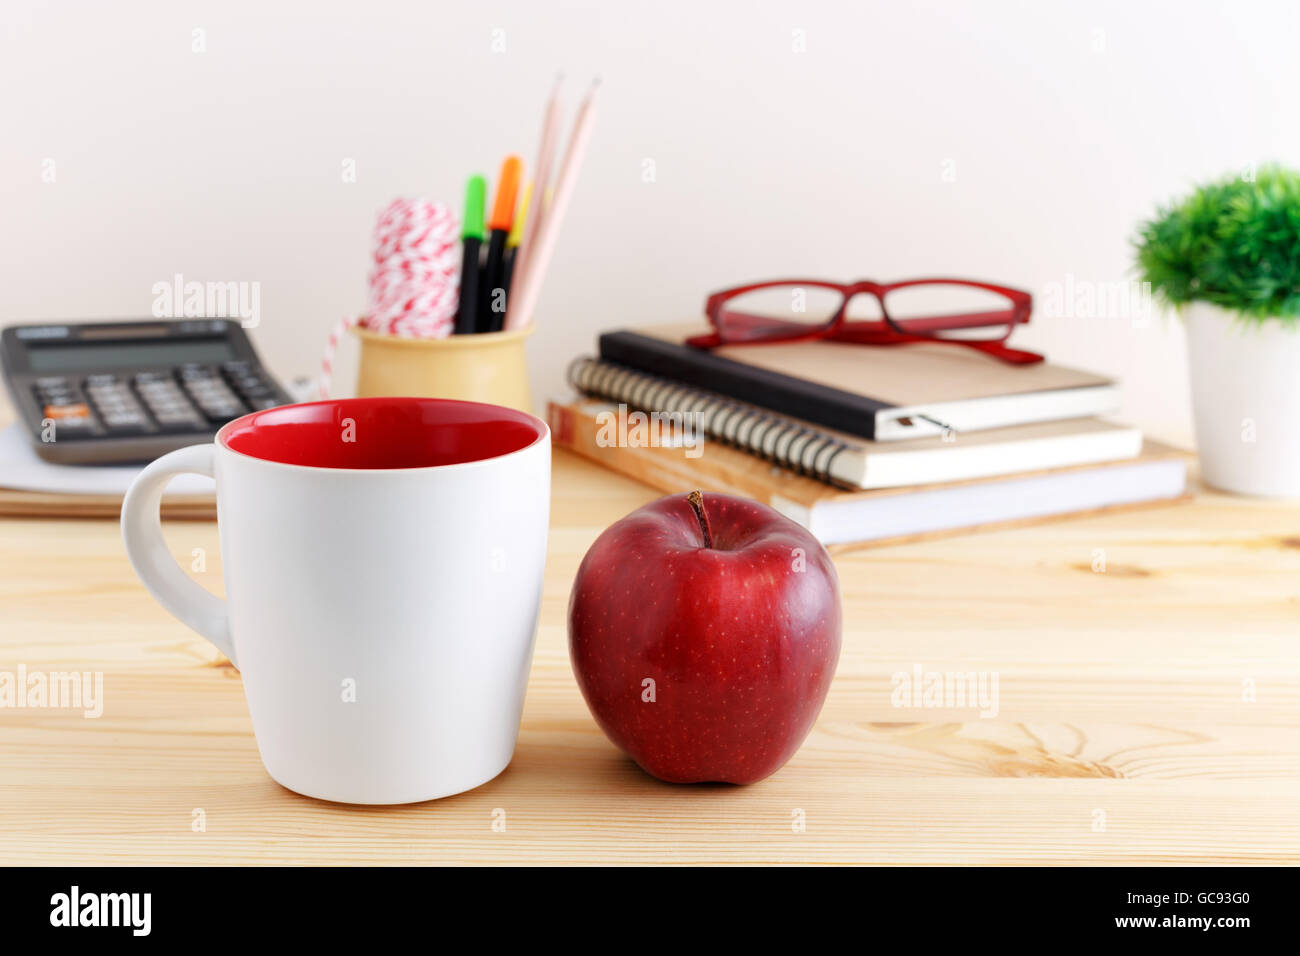 White coffee mug mockup with red apple on wooden table Stock Photo